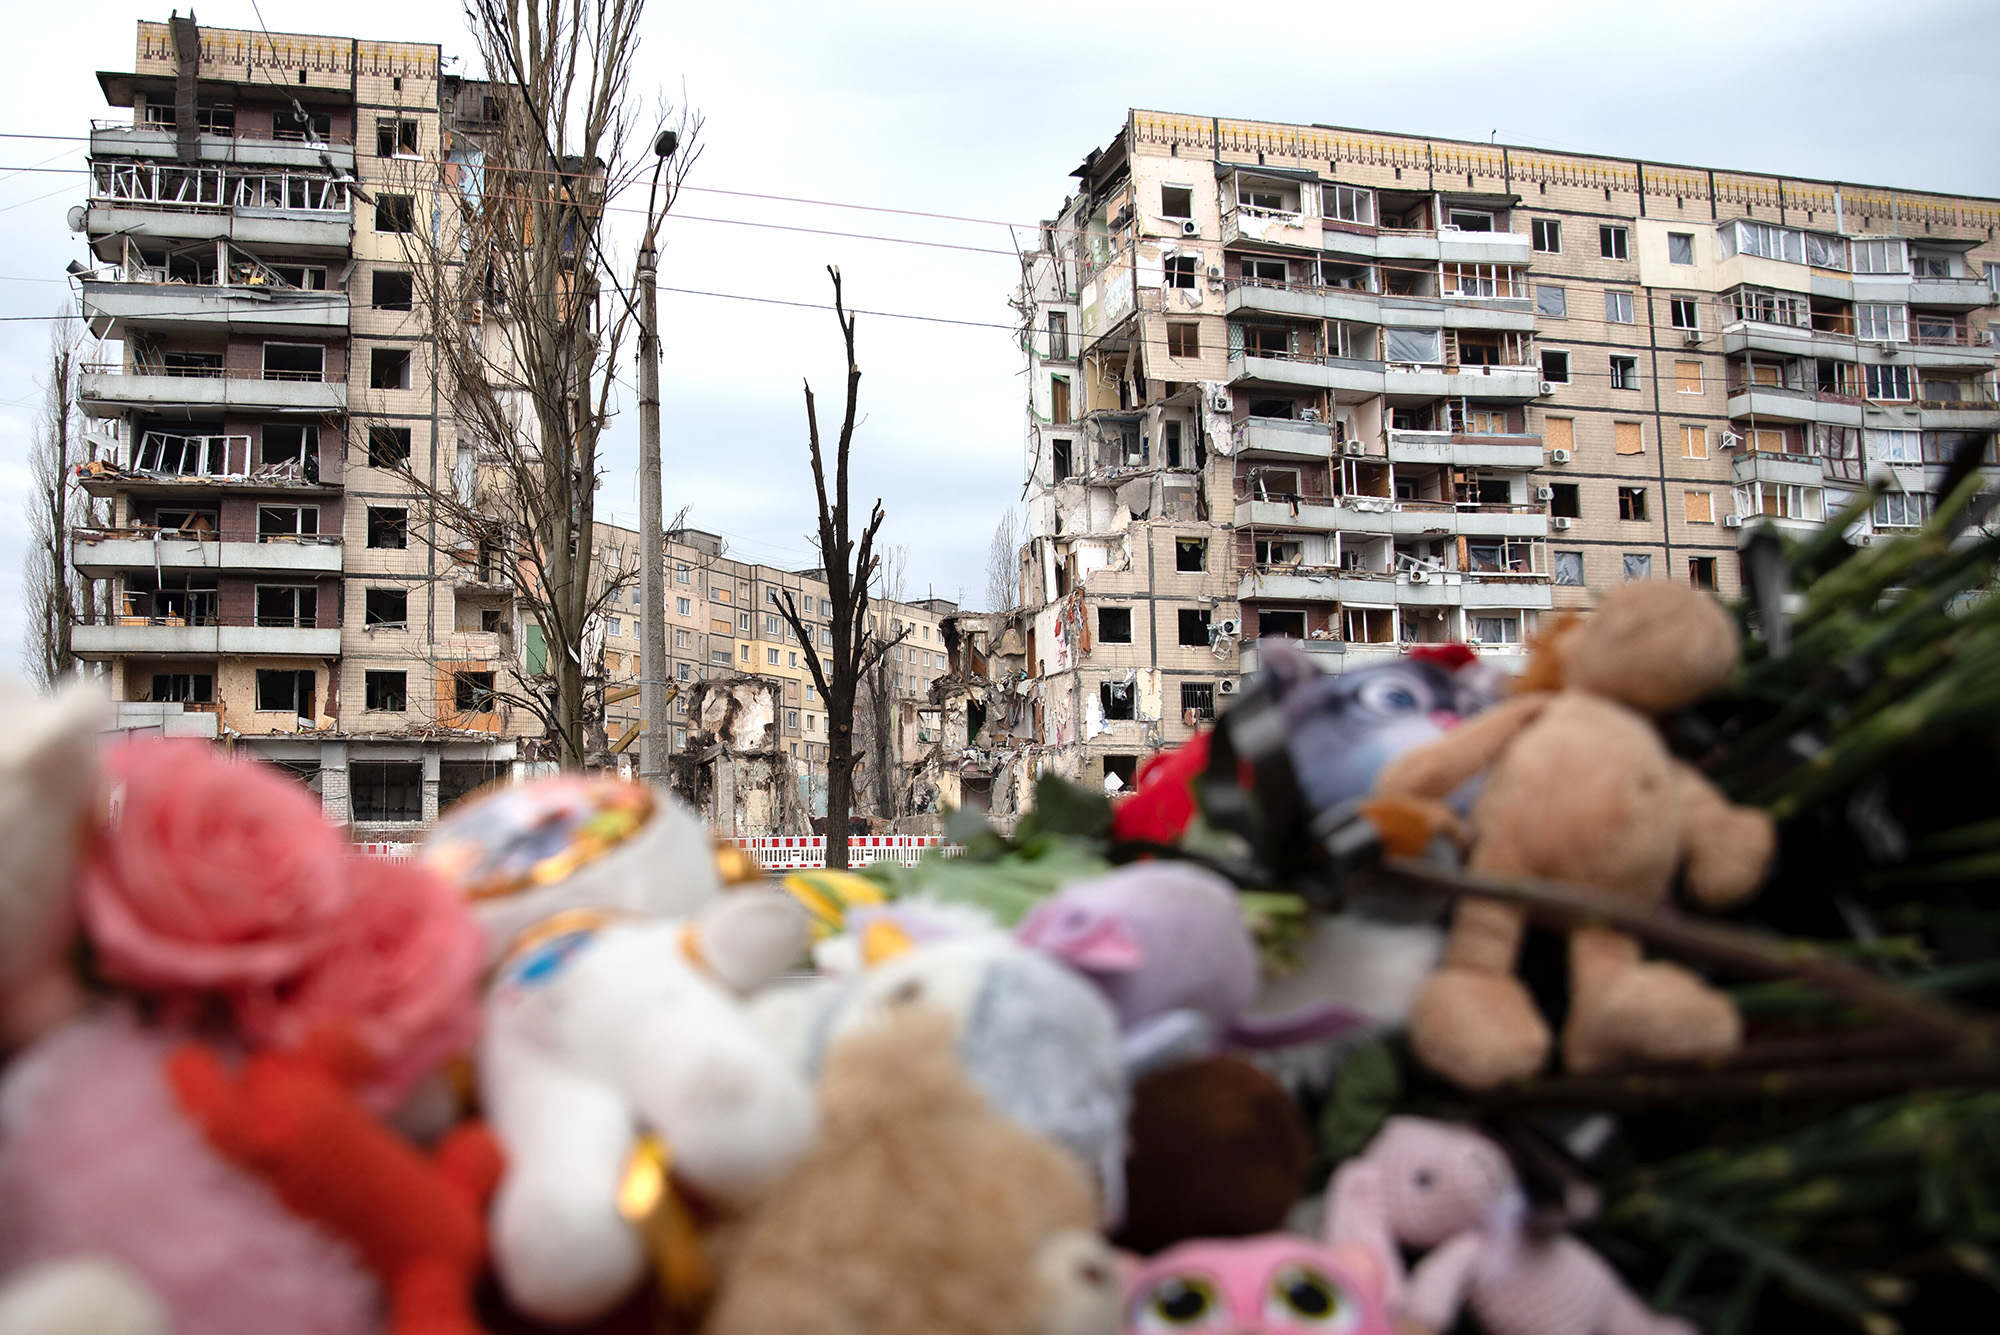 Memorial area in front of the apartment building destroyed by a Russian missile in the city of Dnipro, Ukraine, on January 18.